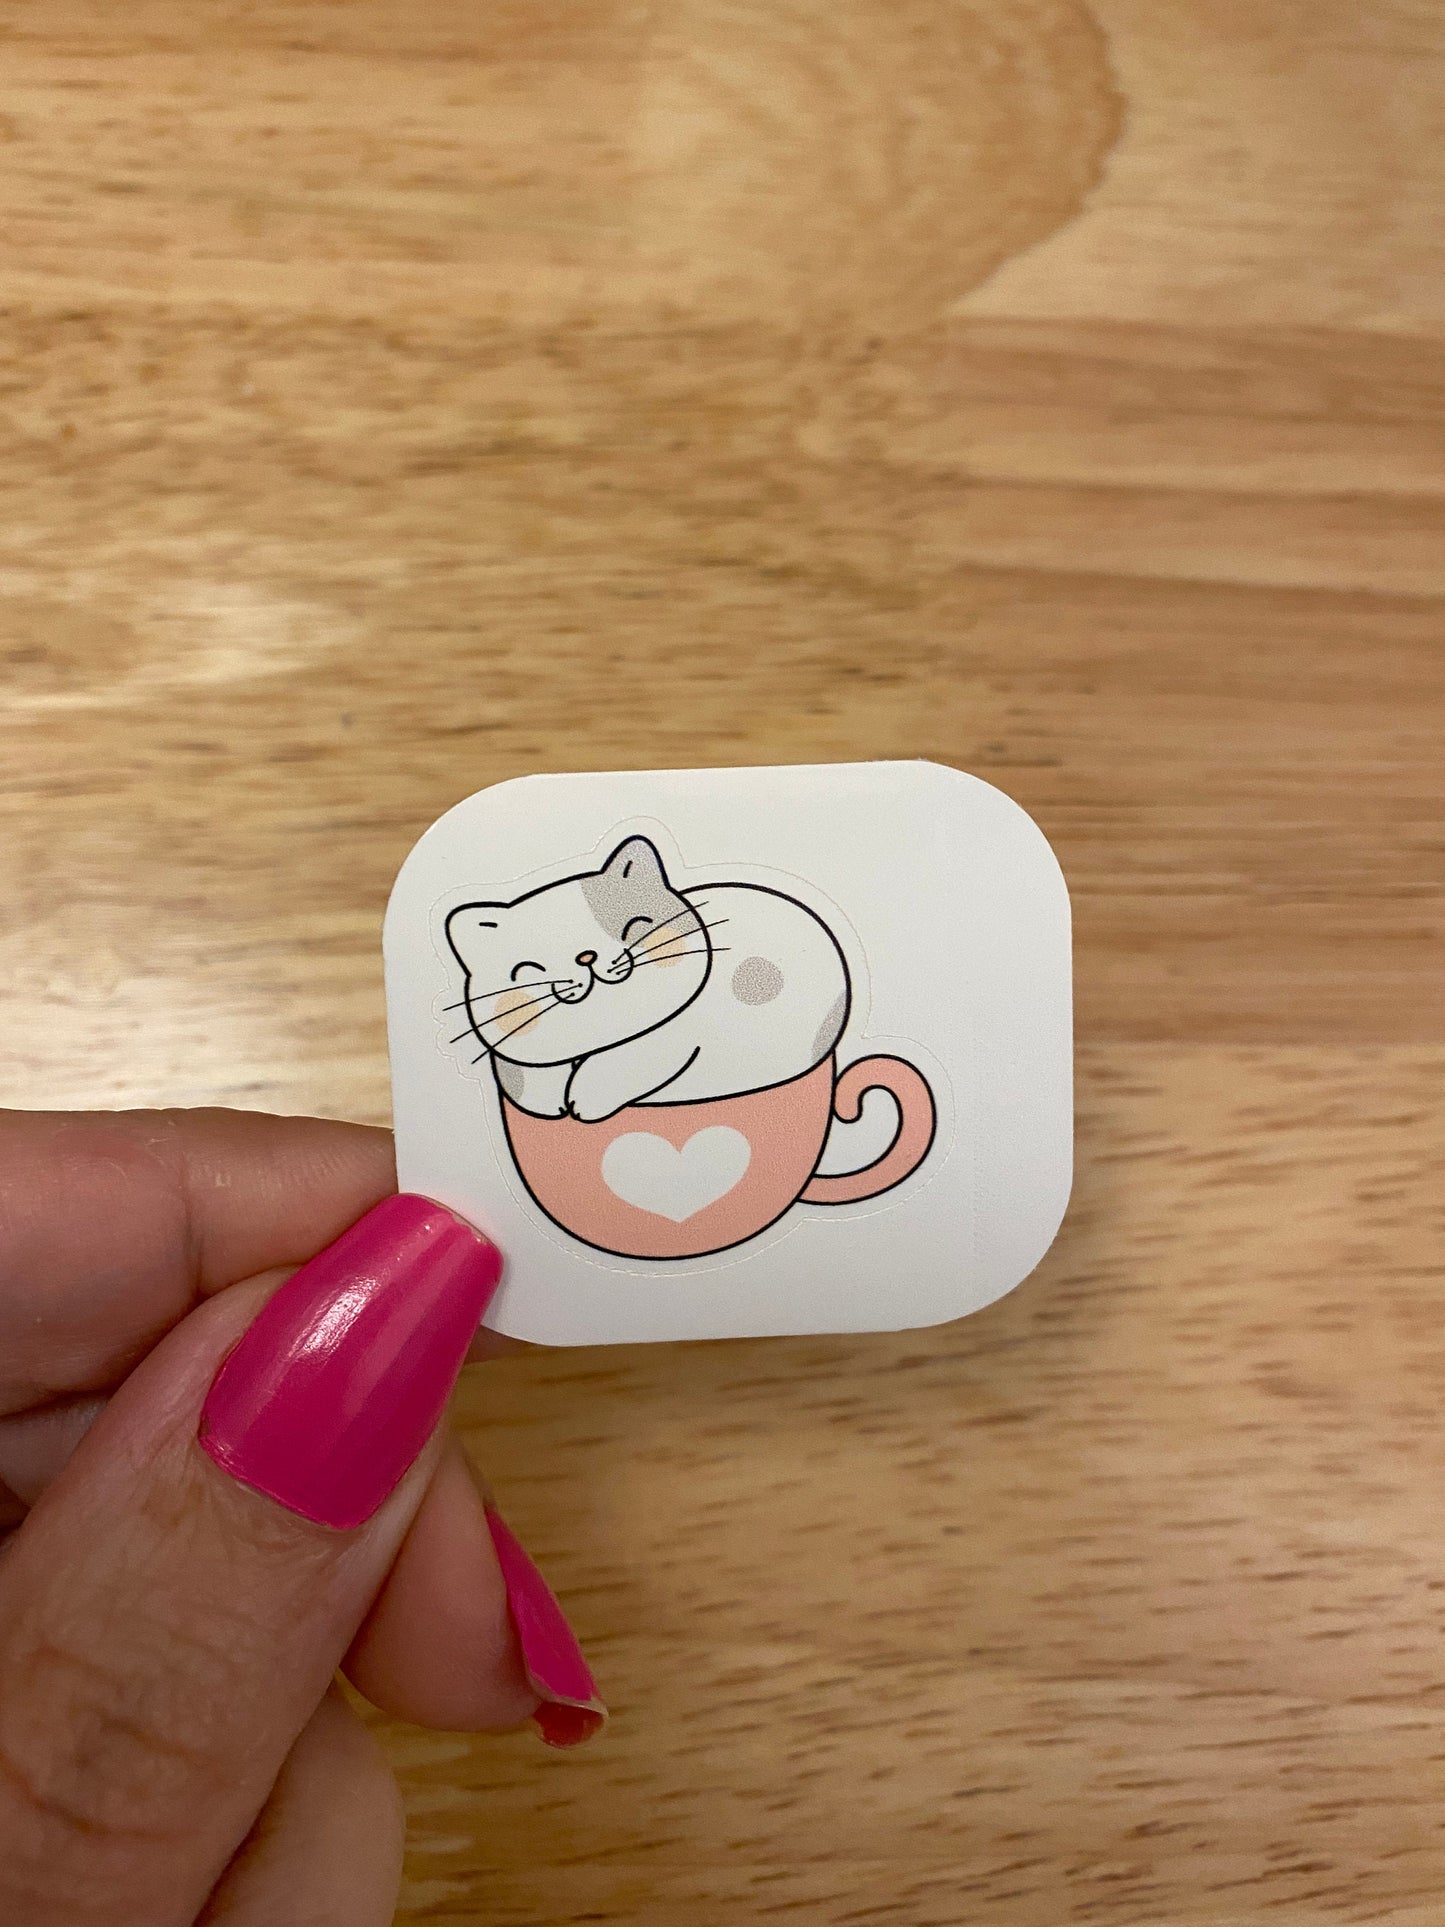 Pink Cup with Heart Kitty STICKER, Cat in cup Sticker, Holographic option, Cute Cat Design Sticker, Coffee Cup cat sticker